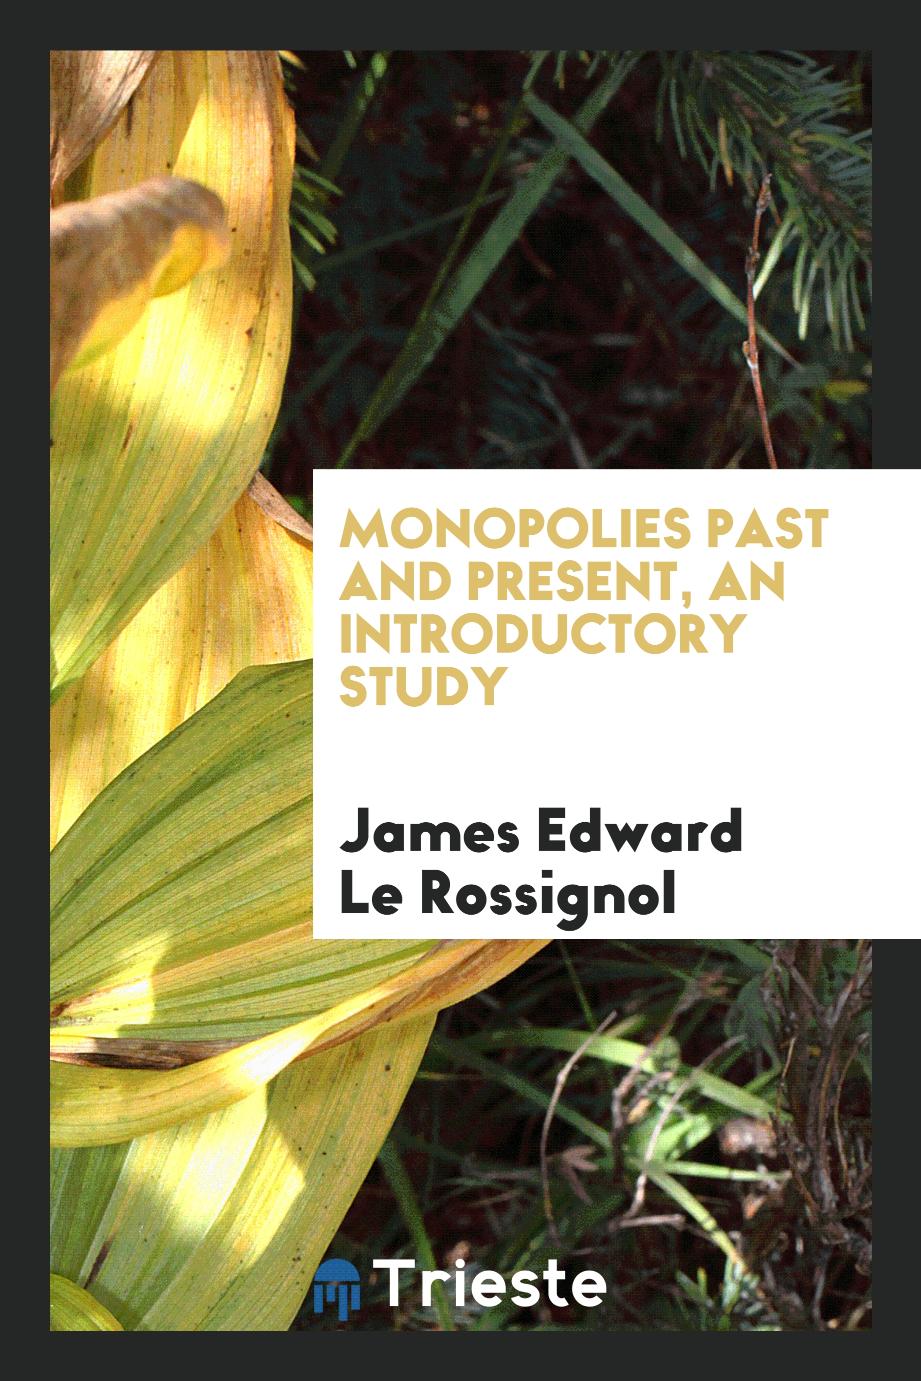 Monopolies past and present, an introductory study